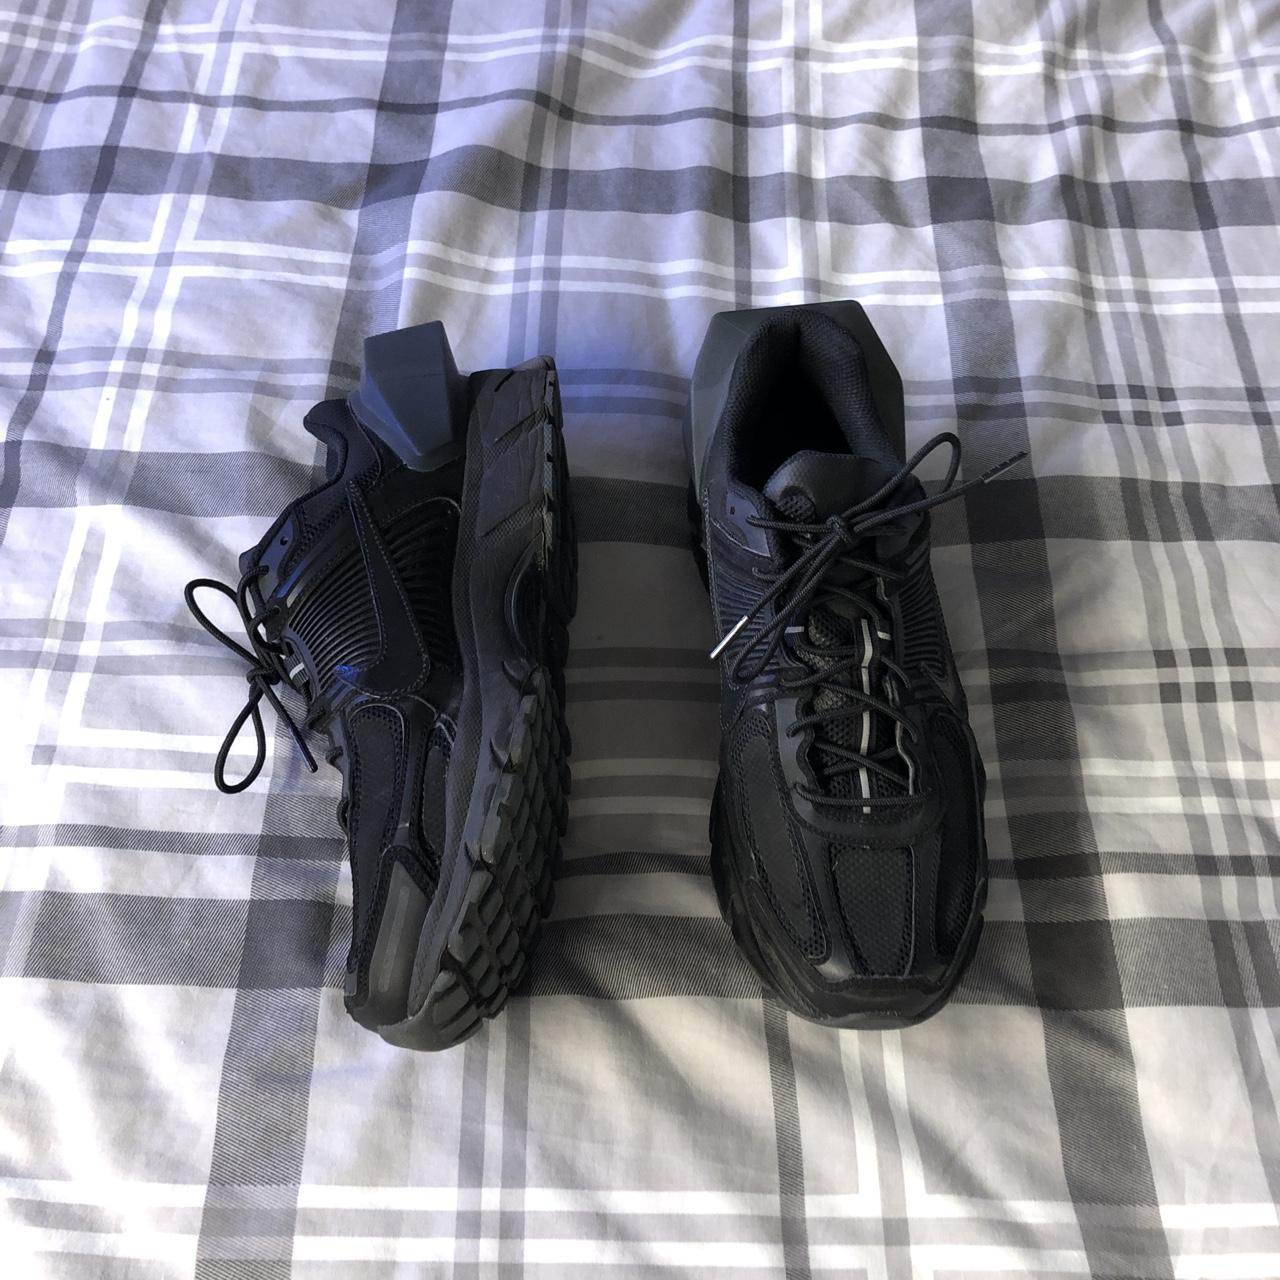 A-COLD-WALL* x Nike Vomero in black colourway. Hands... - Depop